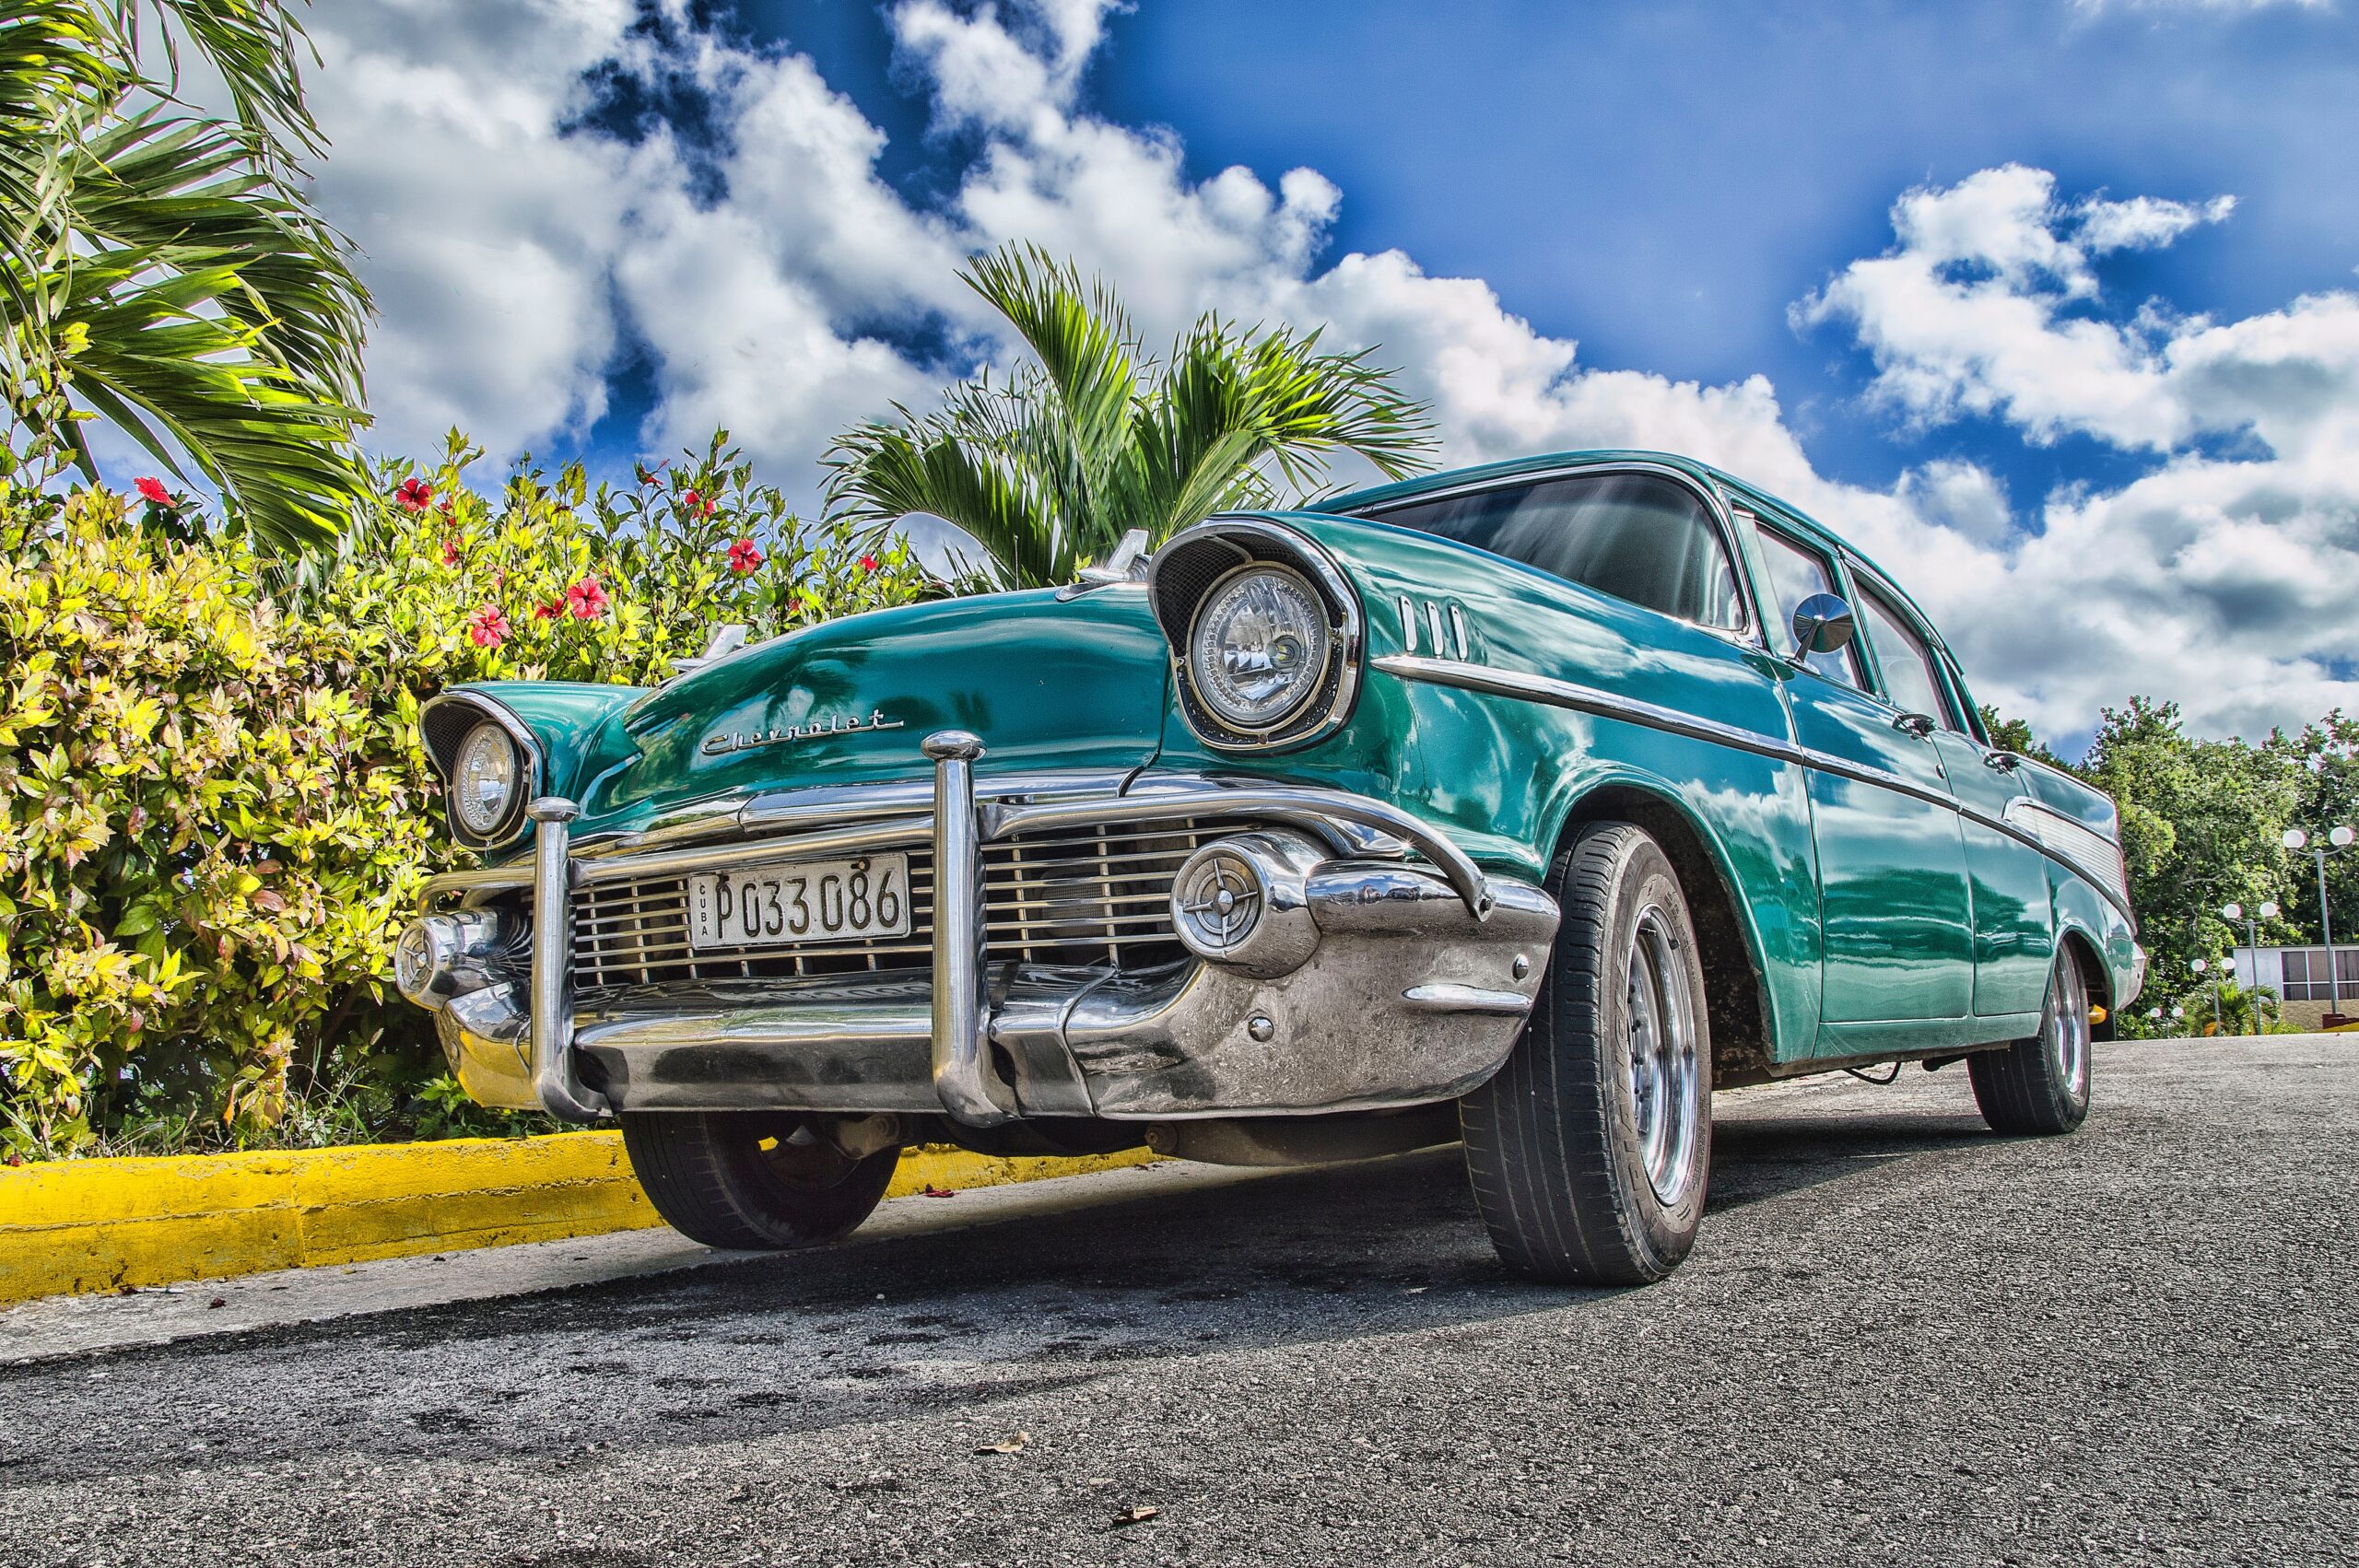 Enjoy the Caribbean with Car Rentals in Puerto Plata - A Complete Guide